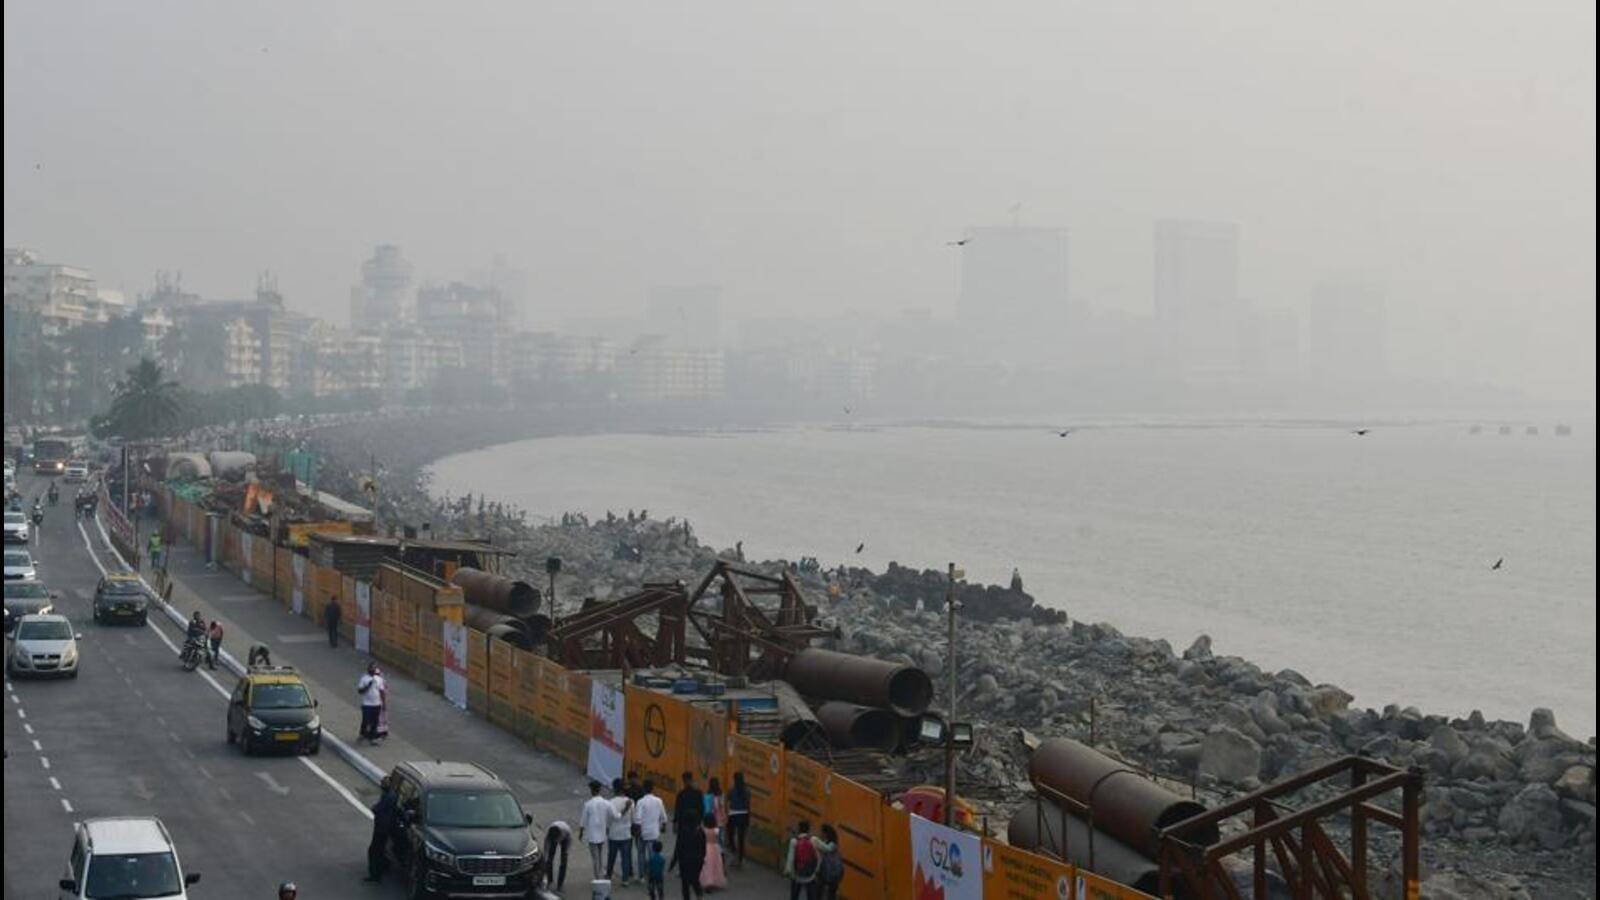 MPCB's last month's warning on pollution emergency unheeded